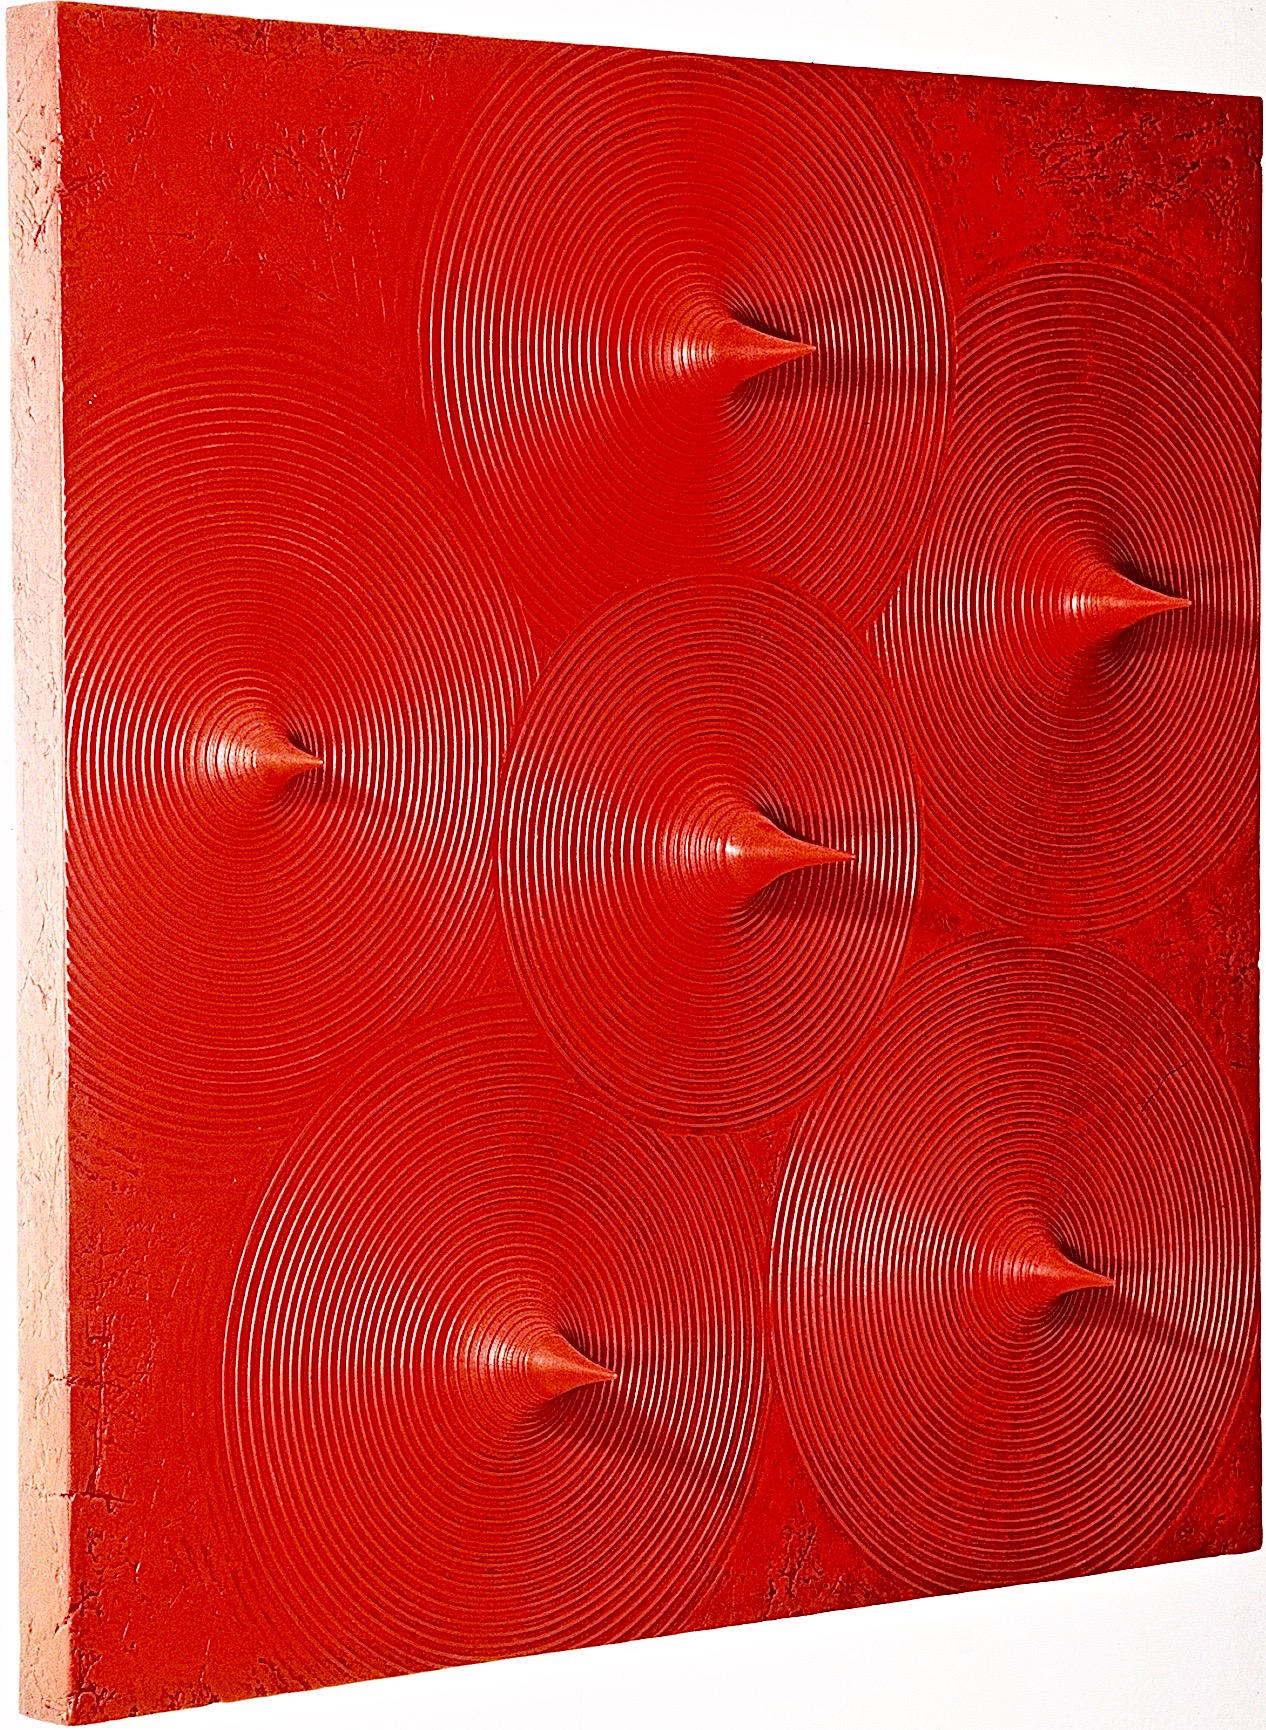 Thomas Coffin - Spikes (red) - side view